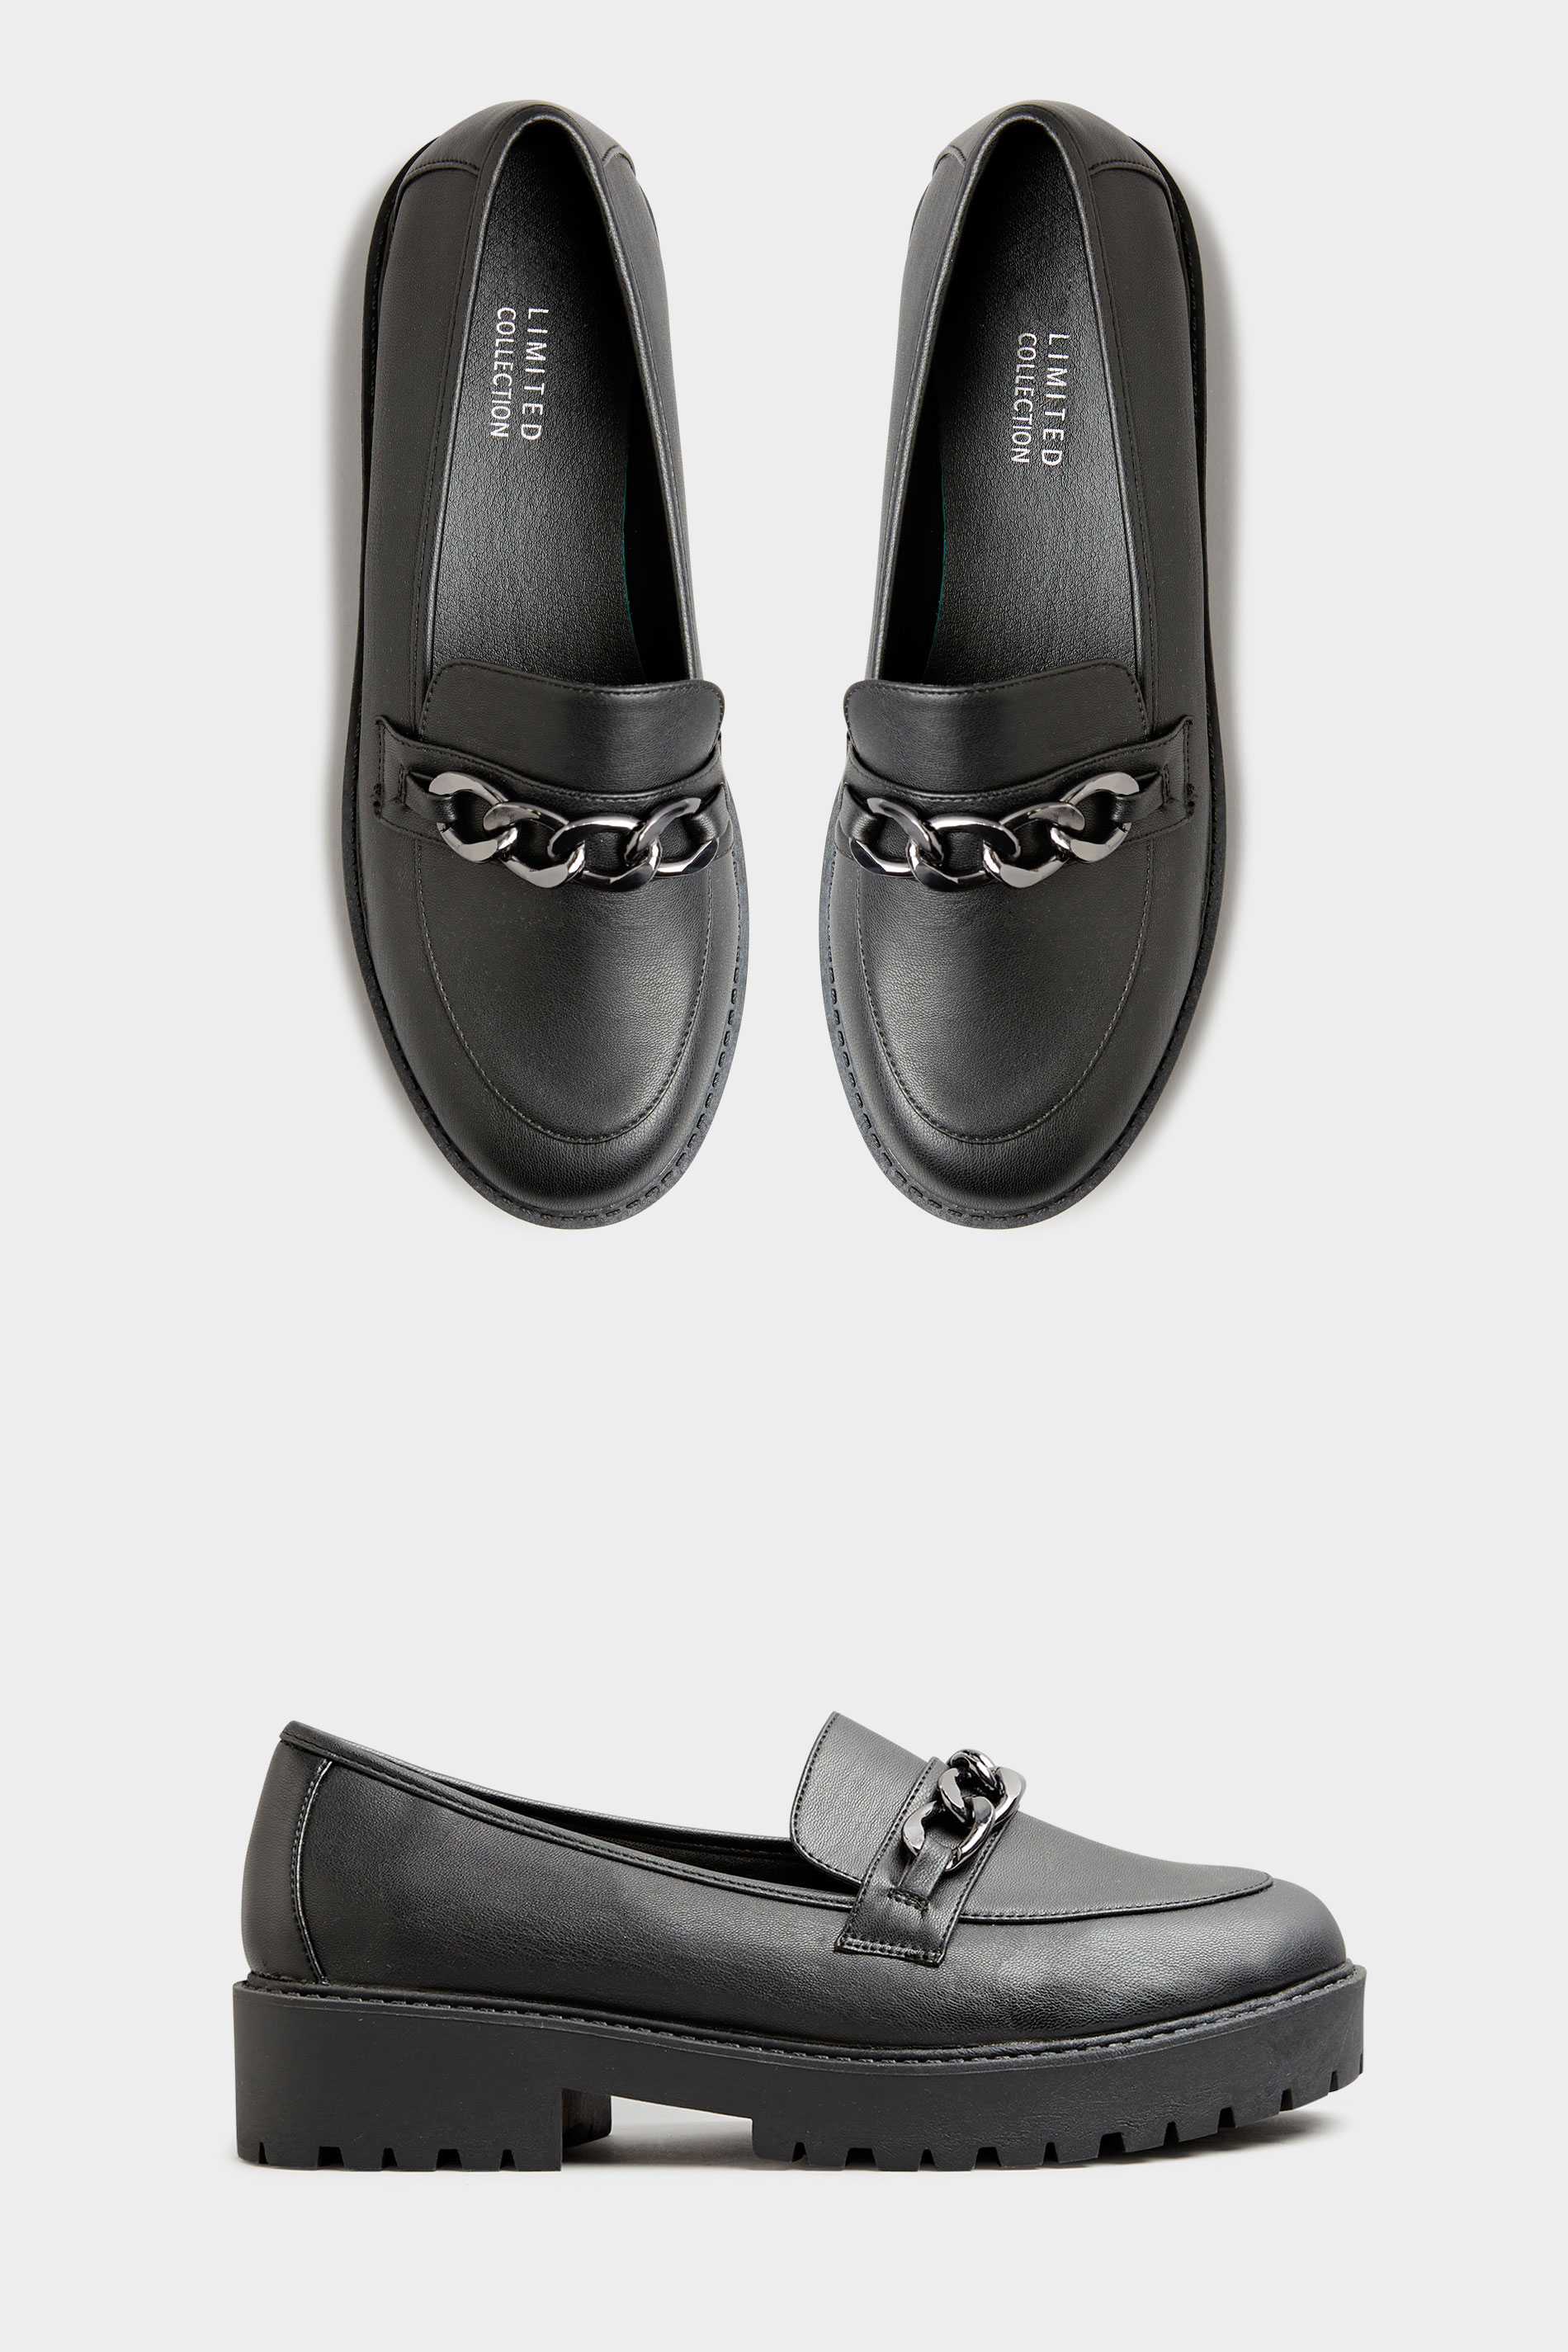 black yacht loafers